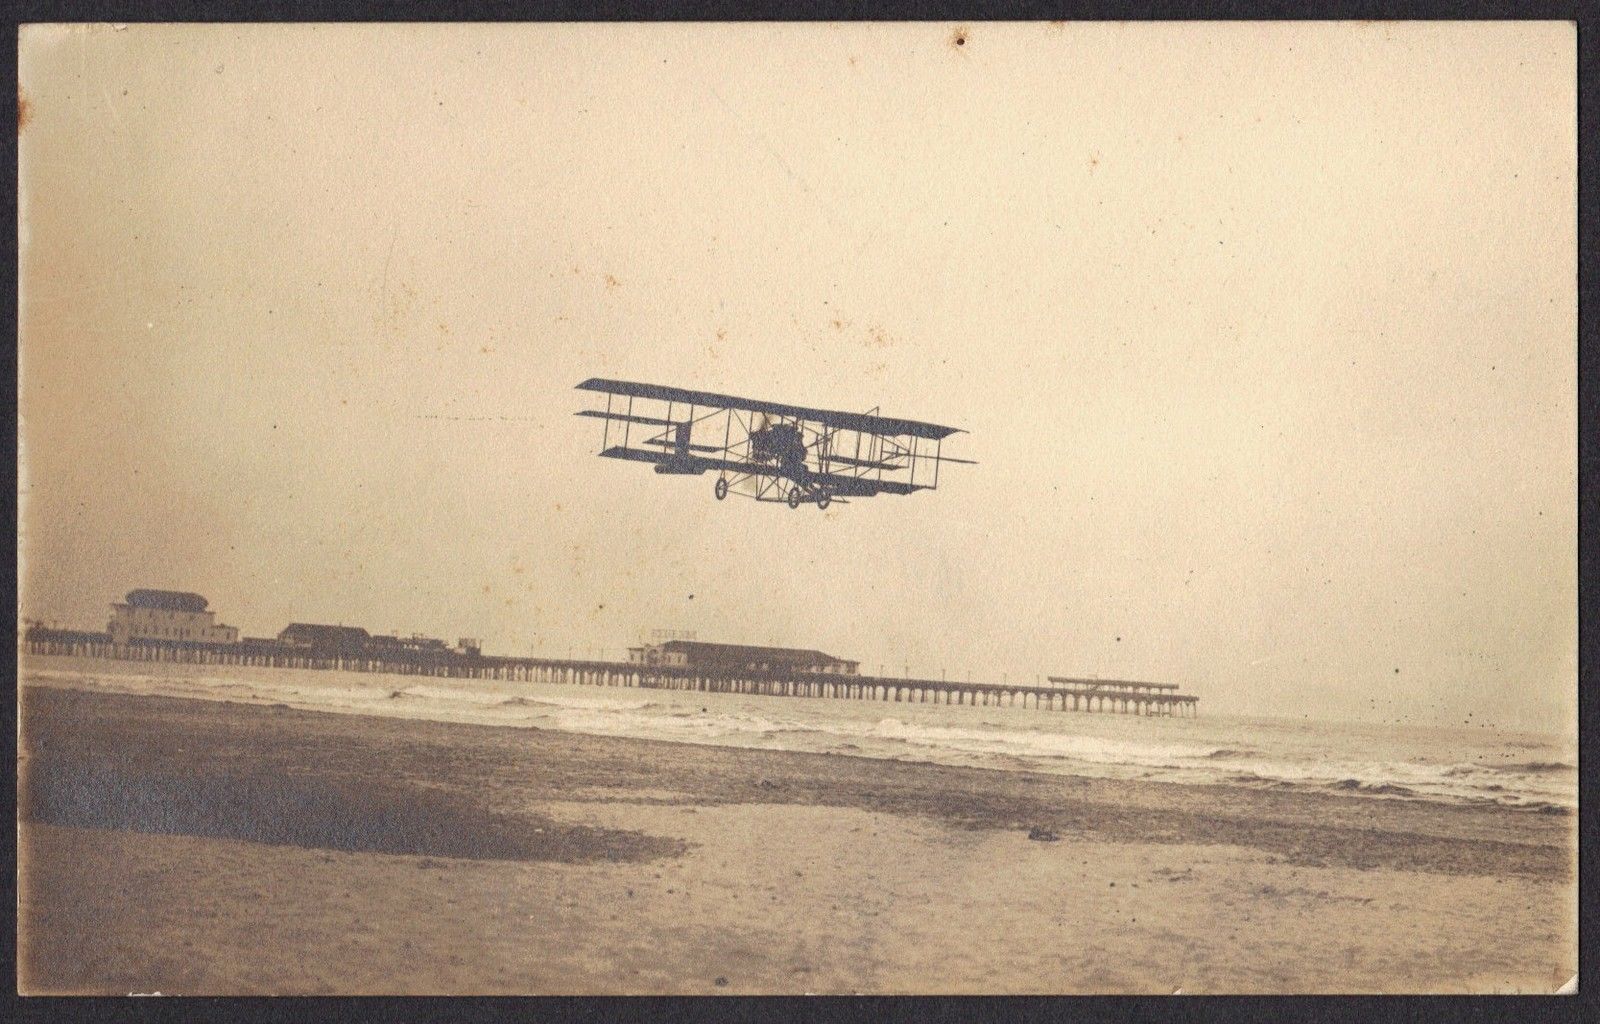 Atlantic City - Curtiss flyer over the beach - c 1910 - front